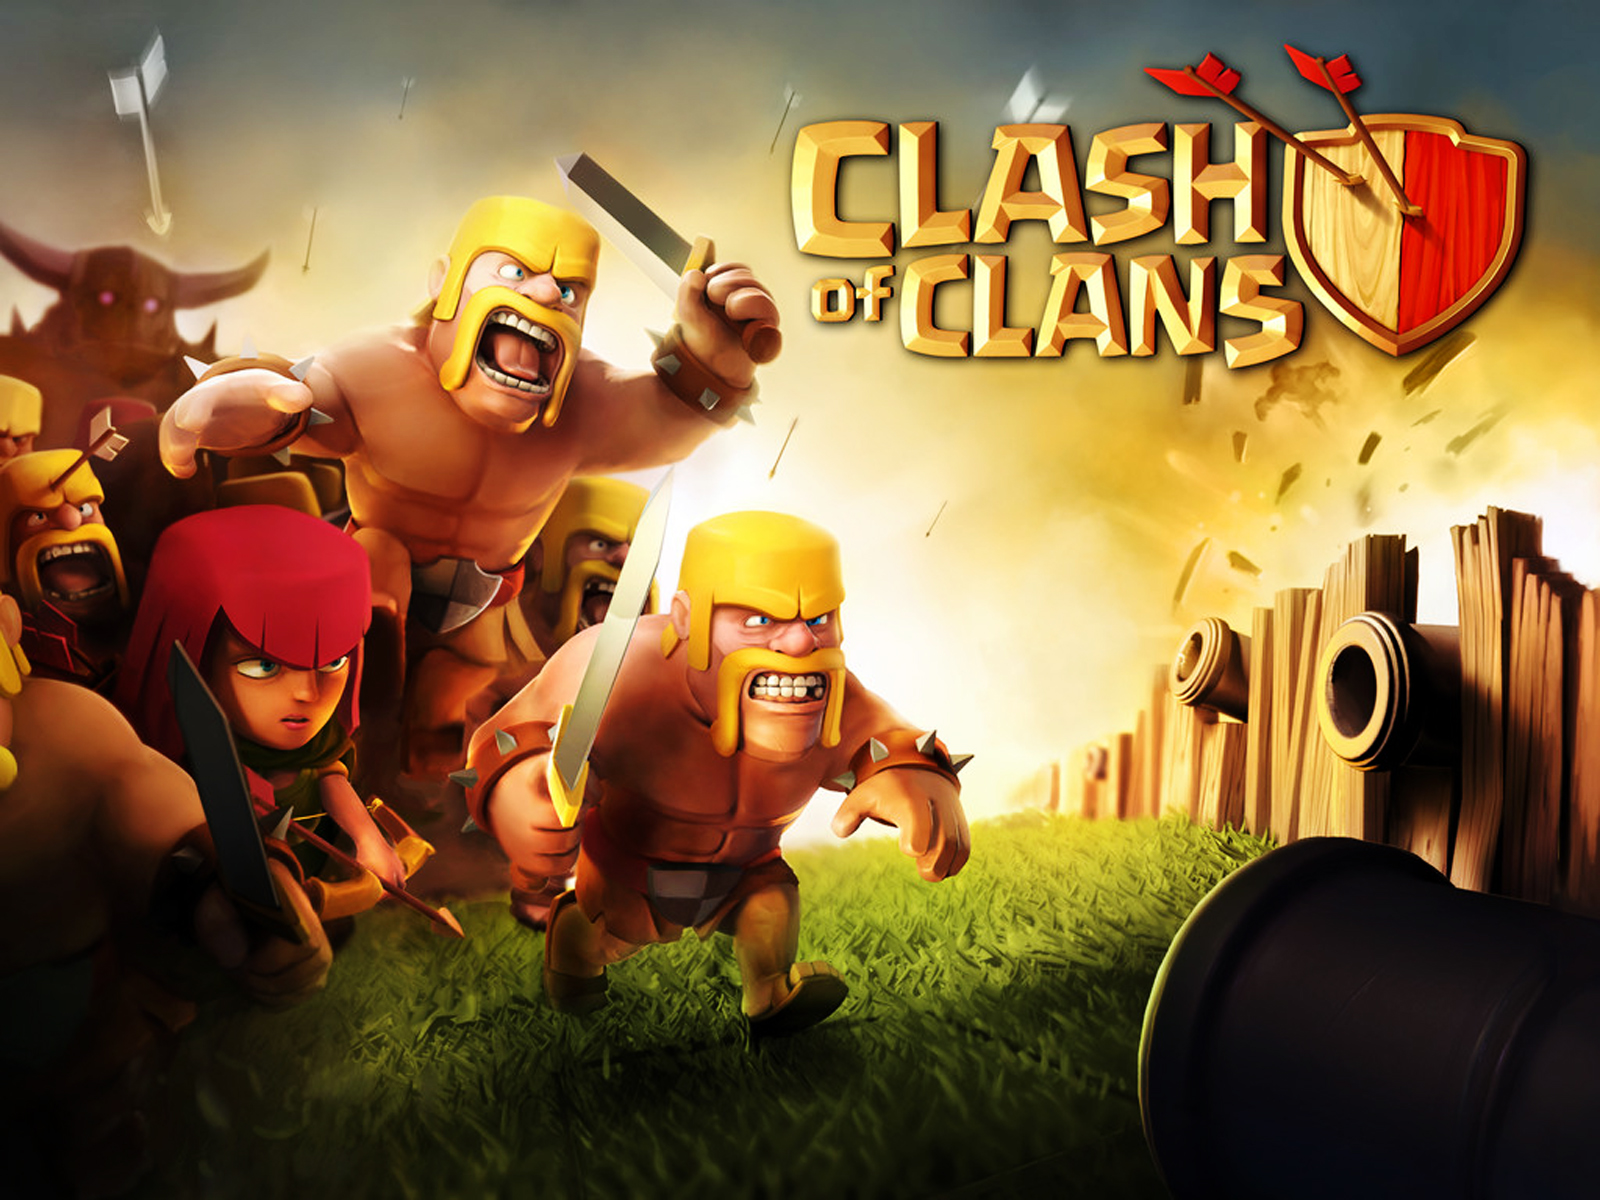 HD Wallpaper Source Clash Of S You Can